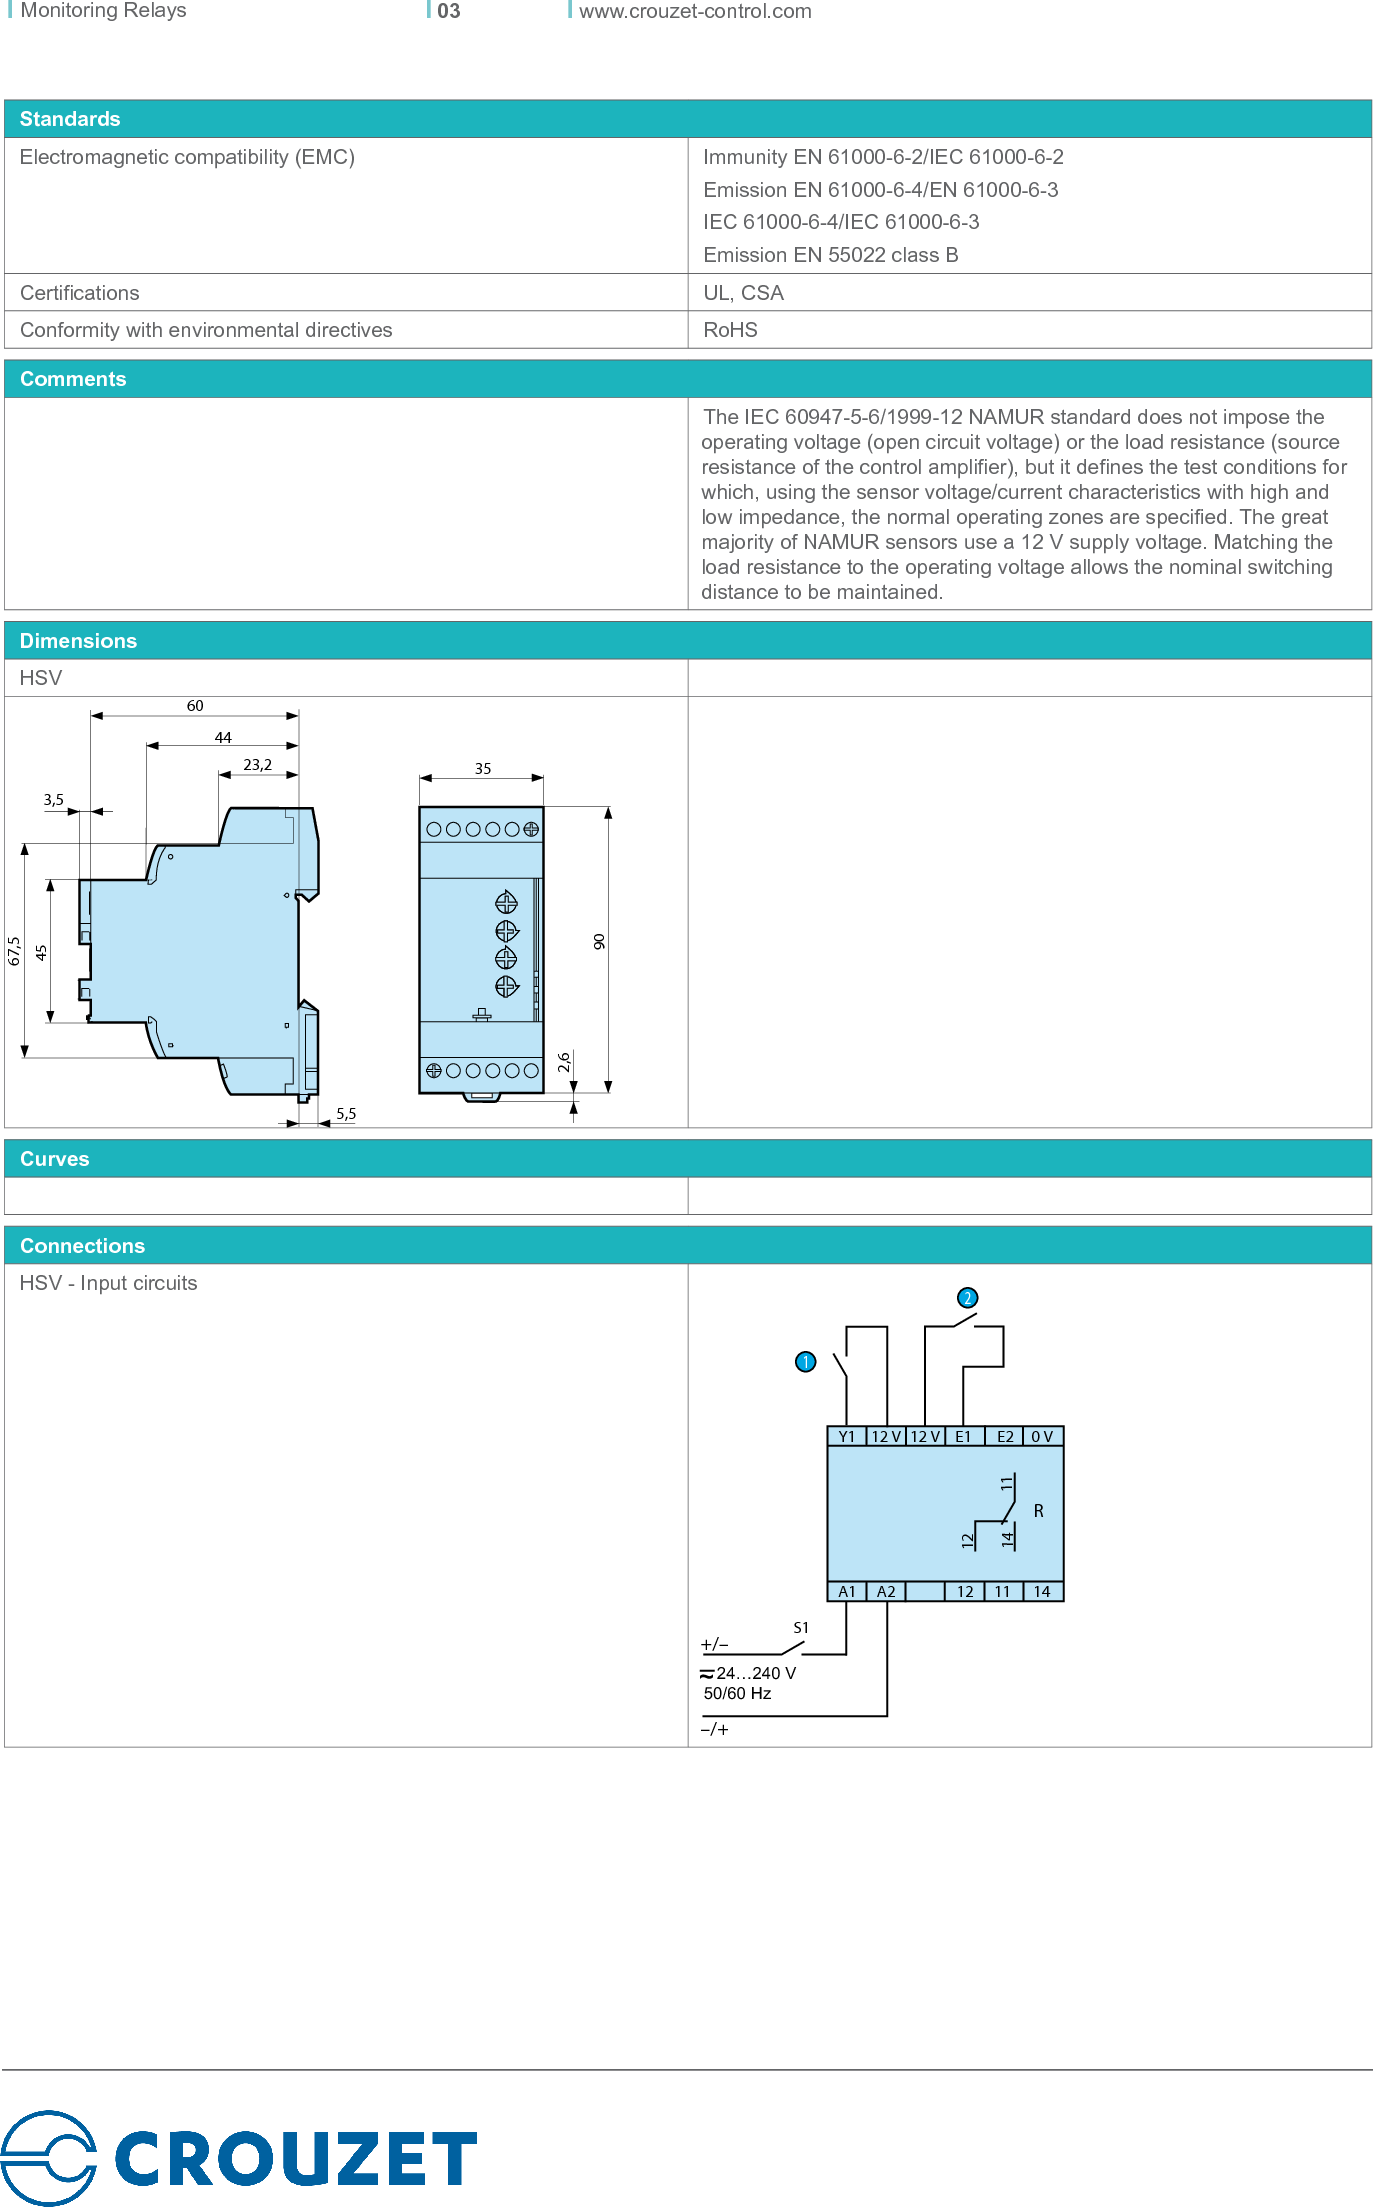 Page 3 of 5 - Crouzet Hsv User Manual